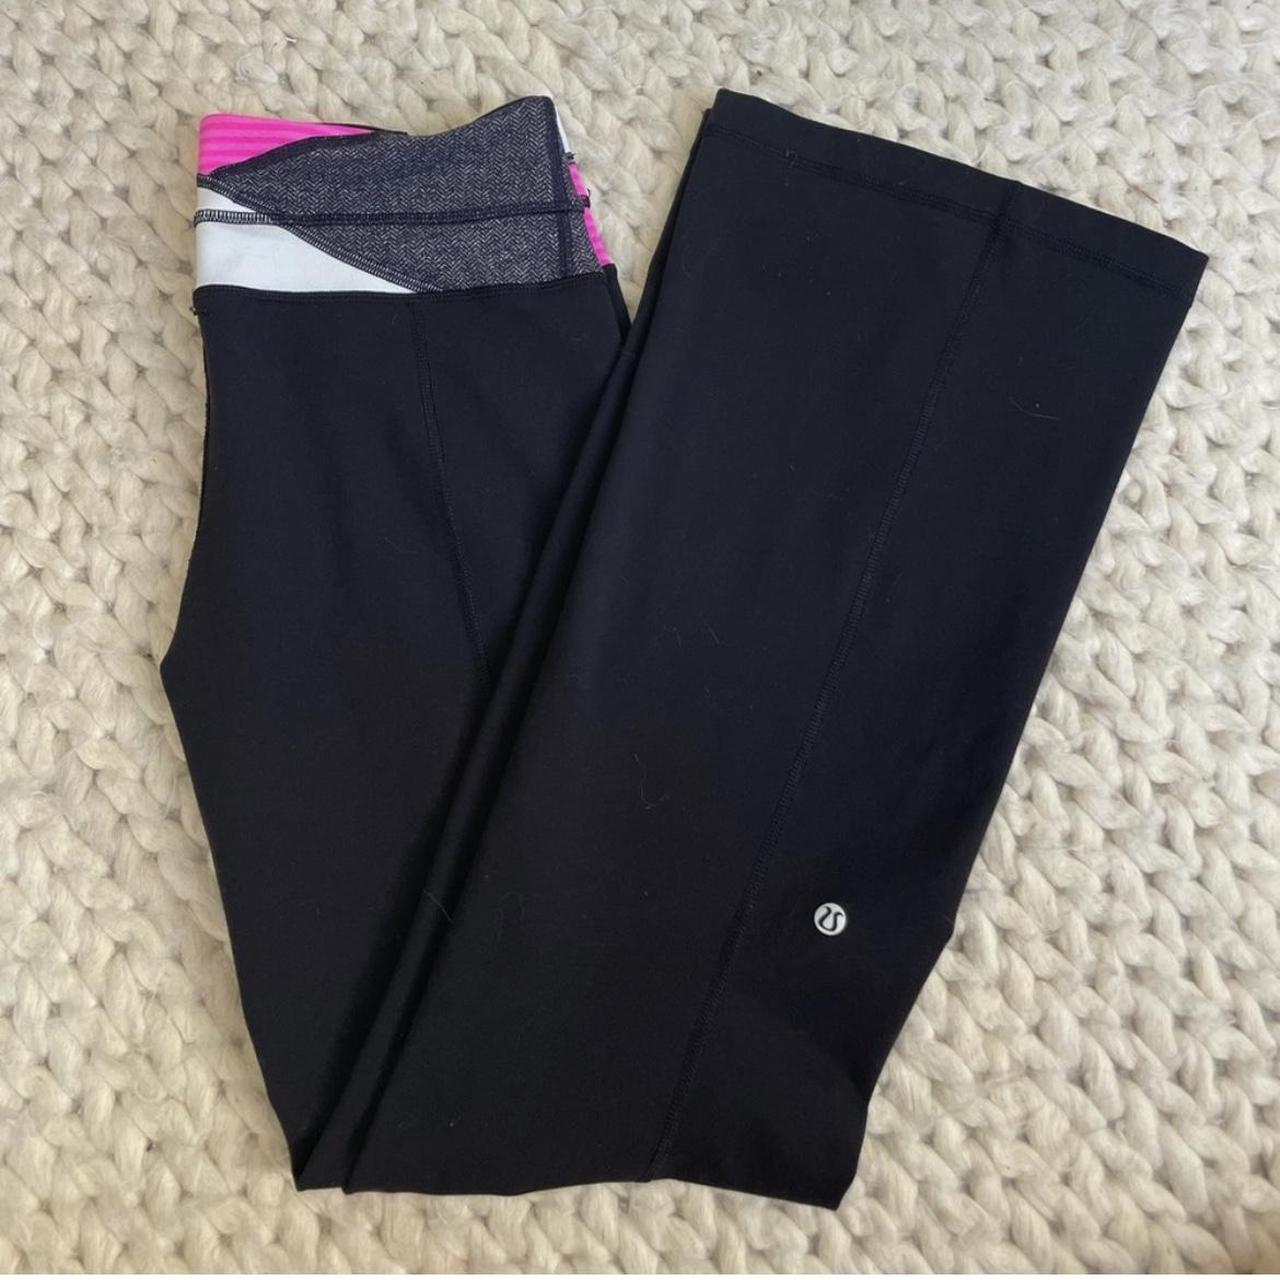 Lululemon Groove Pant, Reversible, one side is all